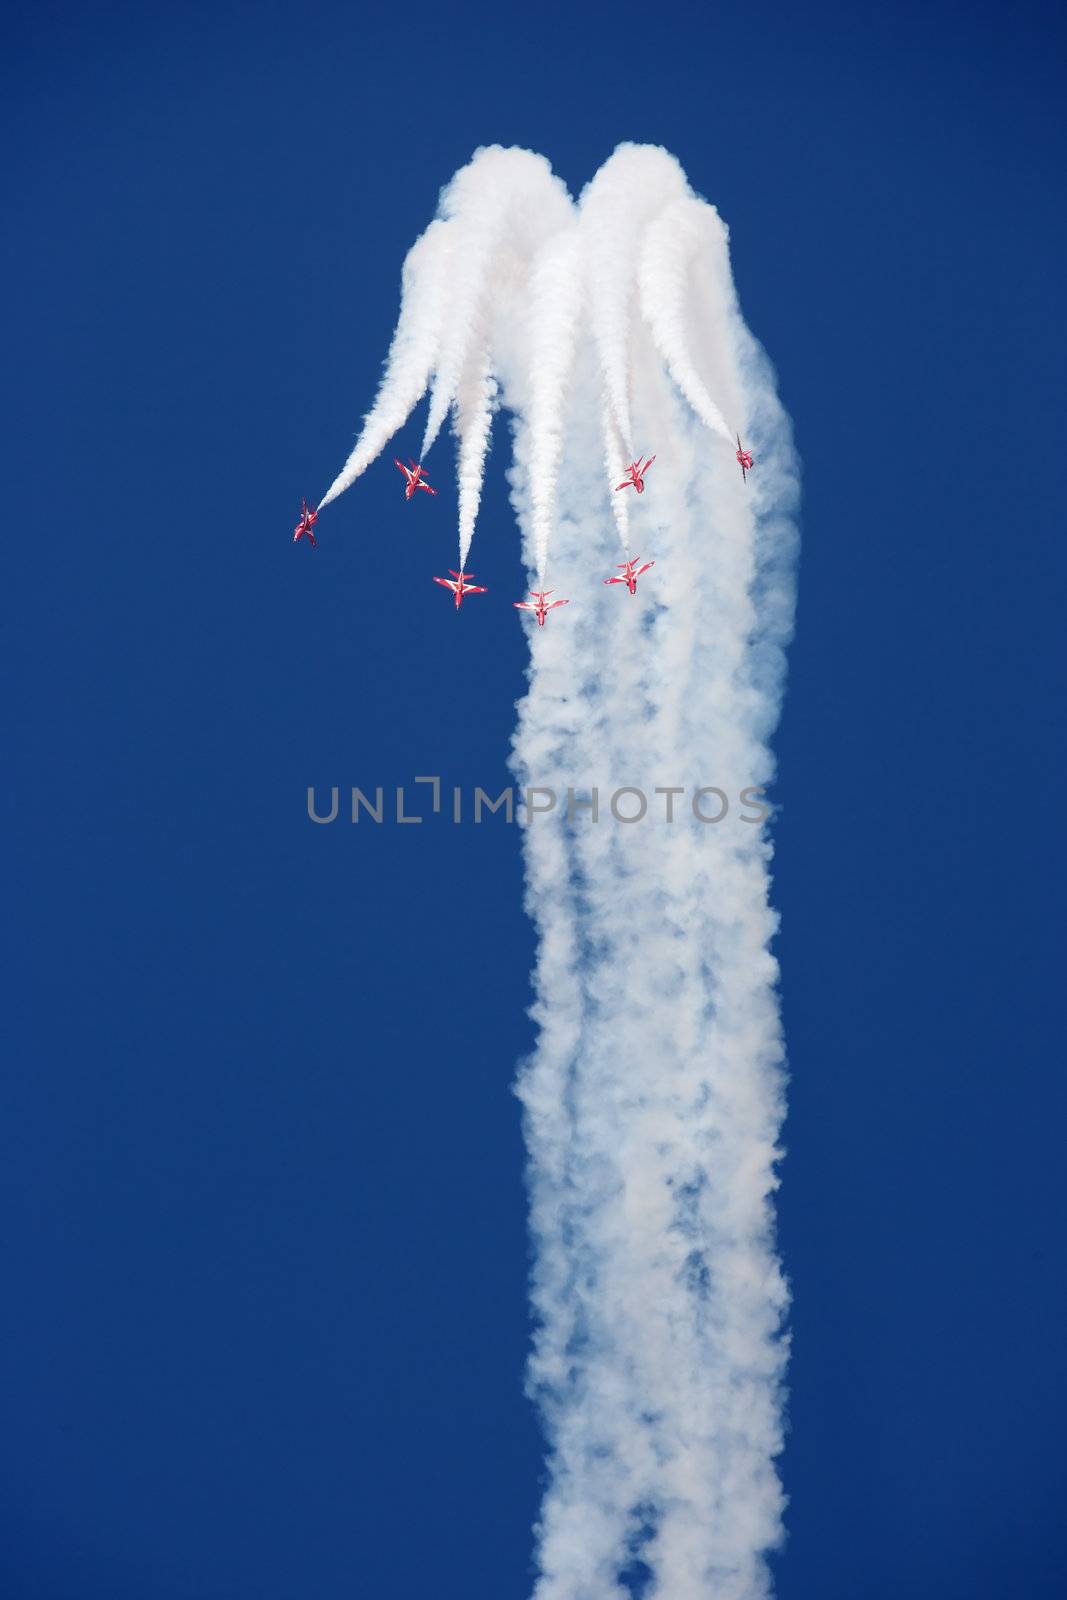 The Royal Air Force's Red Arrows team perform in their BAE Hawk aircraft at the Dubai Airshow in the United Arab Emirates.